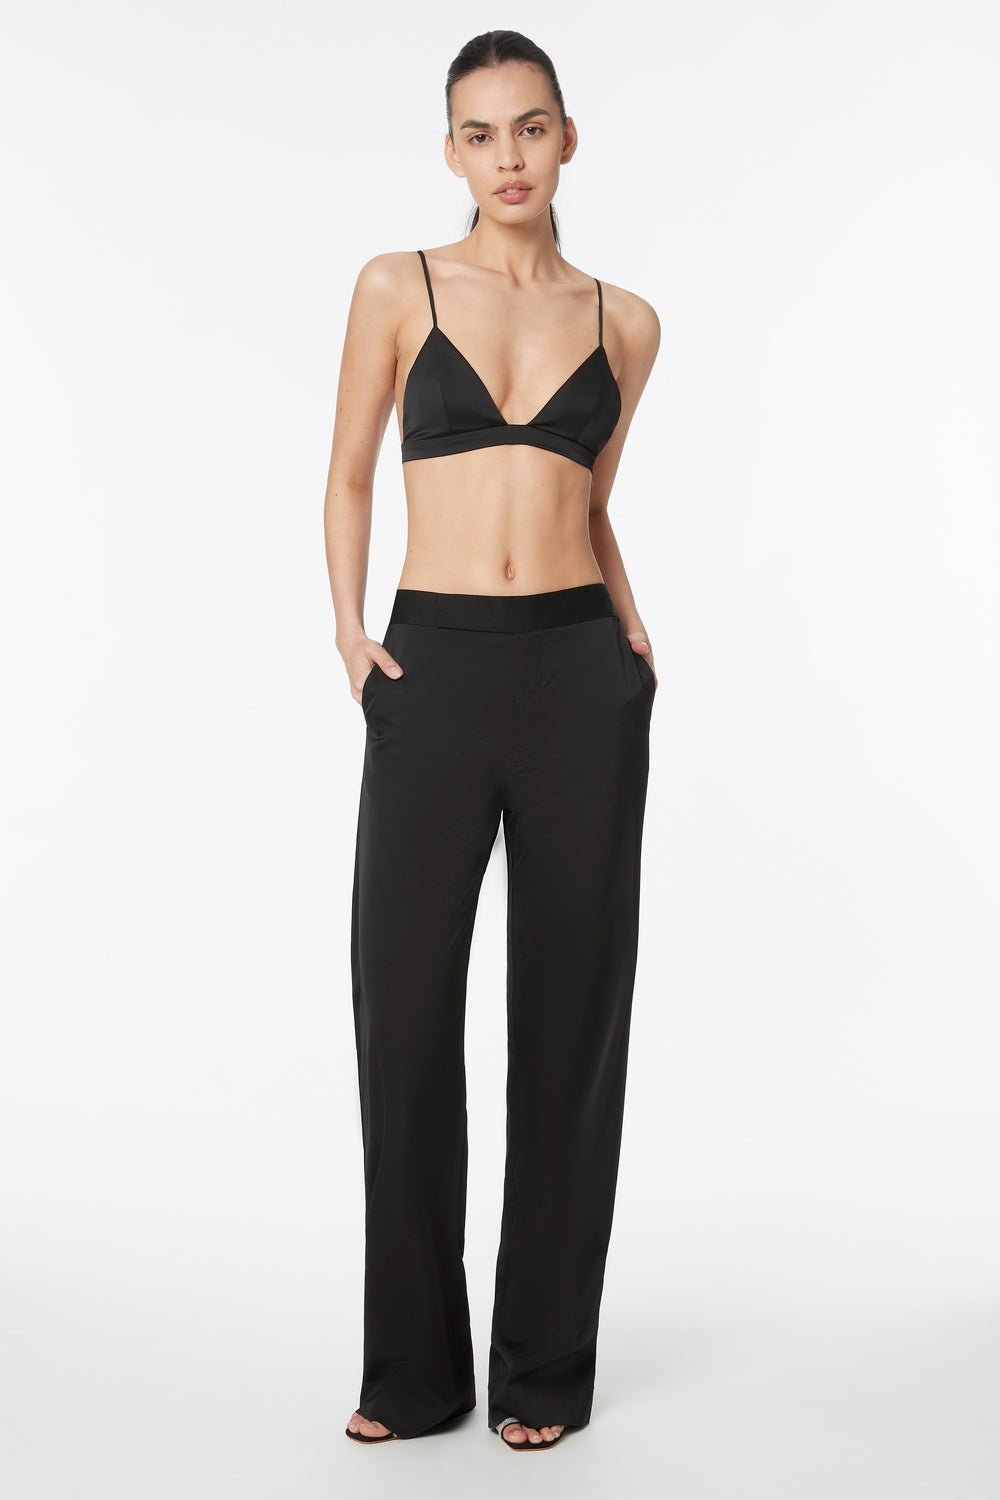 Face to Face Bralette - Black - MANNING CARTELL